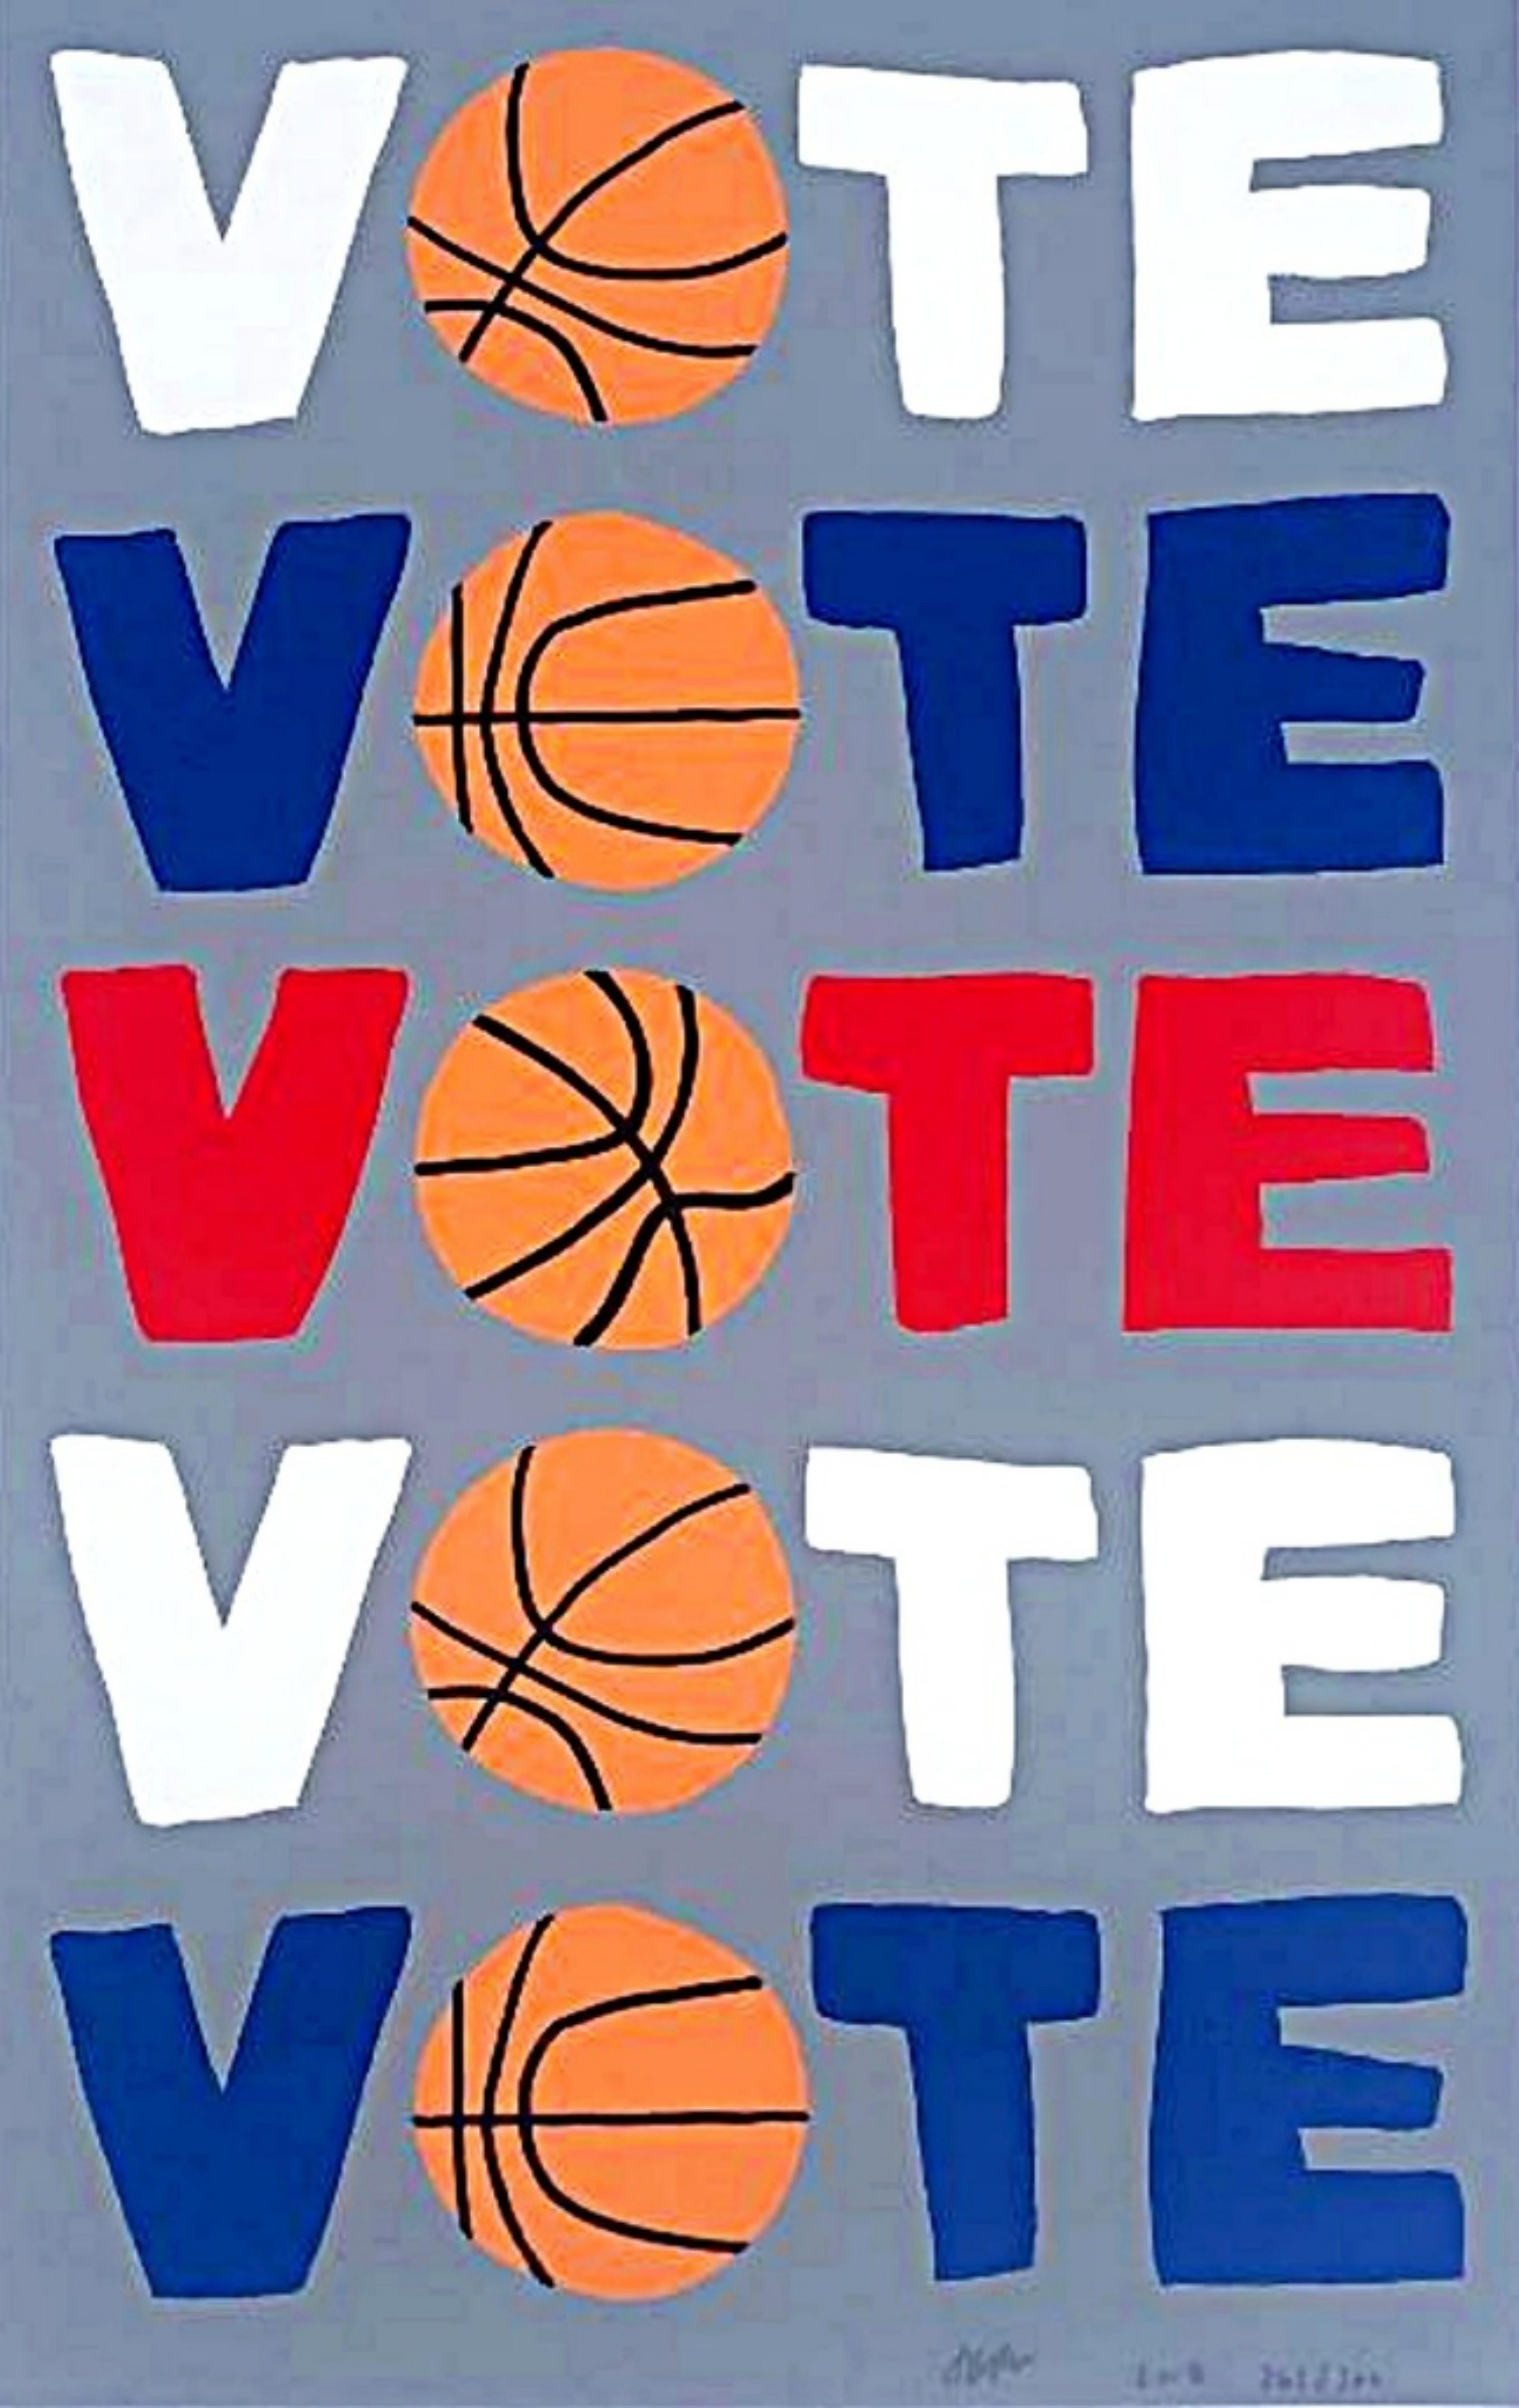 Jonas Wood Print - VOTE, limited edition political silkscreen with artist's famed basketball image